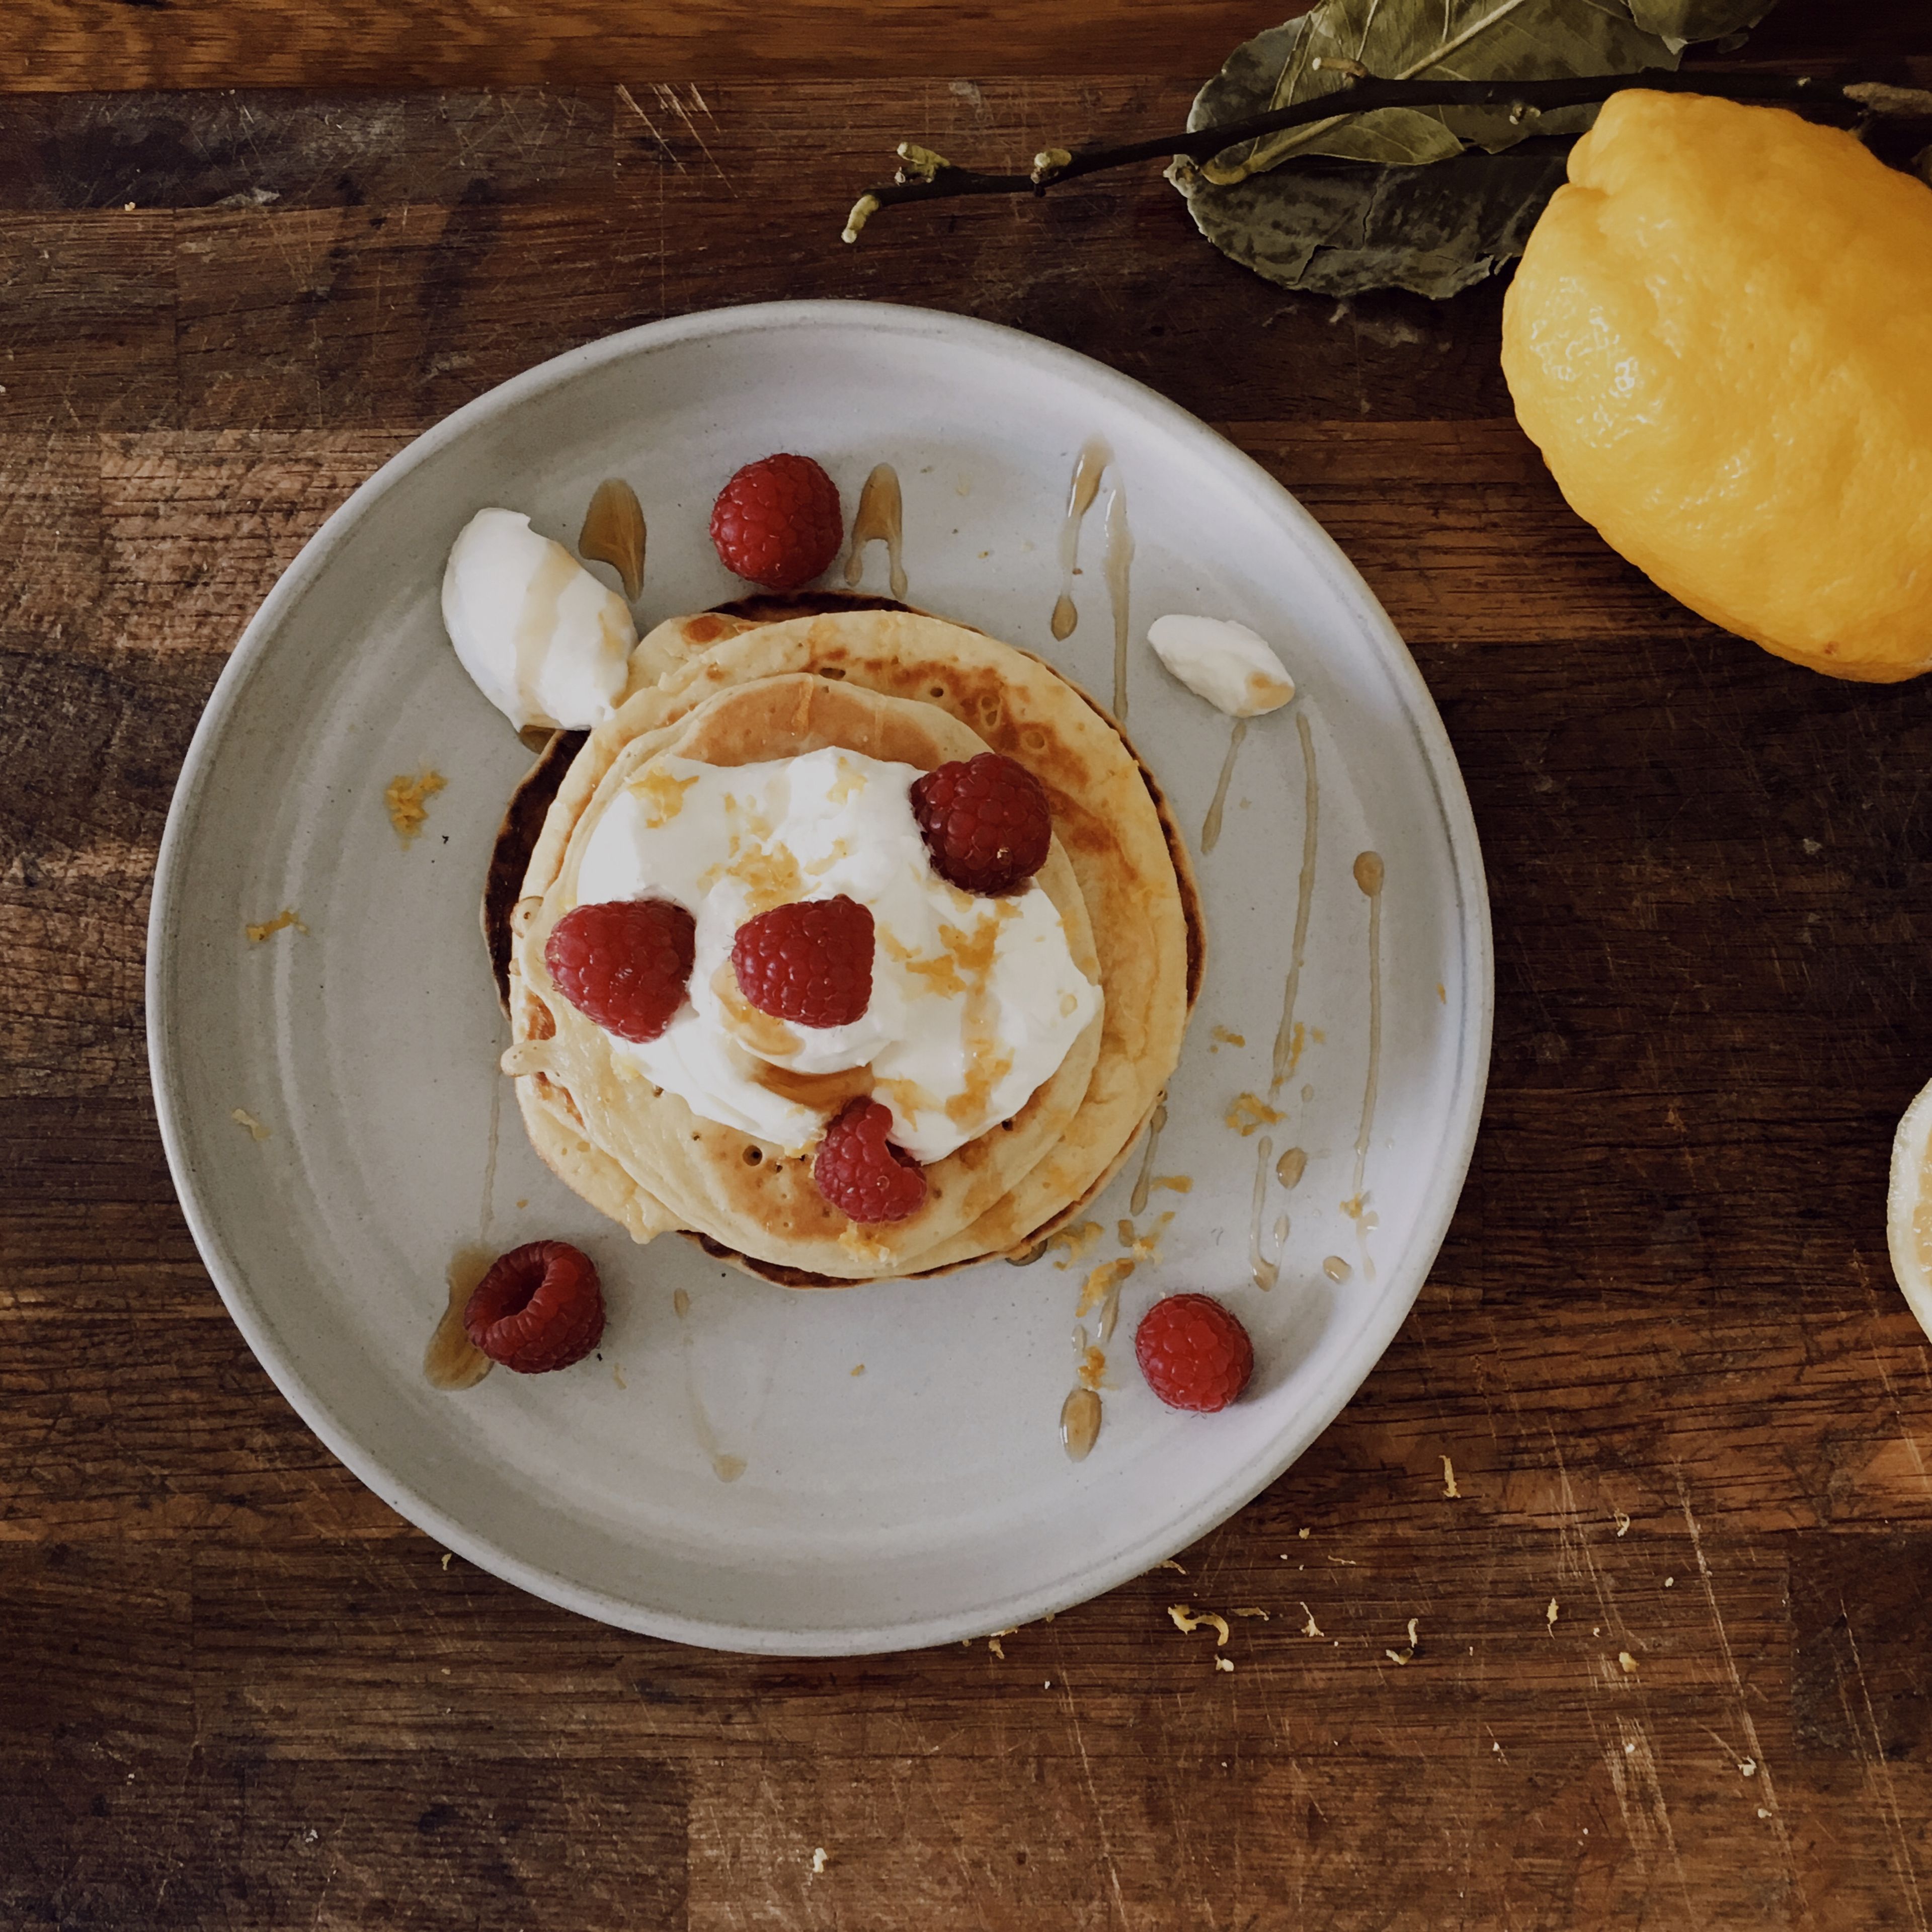 Add the lemon zest, lemon juice and sugar to the mascarpone in a bowl and stir into a smooth cream using a hand mixer with beaters. Serve pancakes with lemon mascarpone cream, maple syrup and lemon zest.